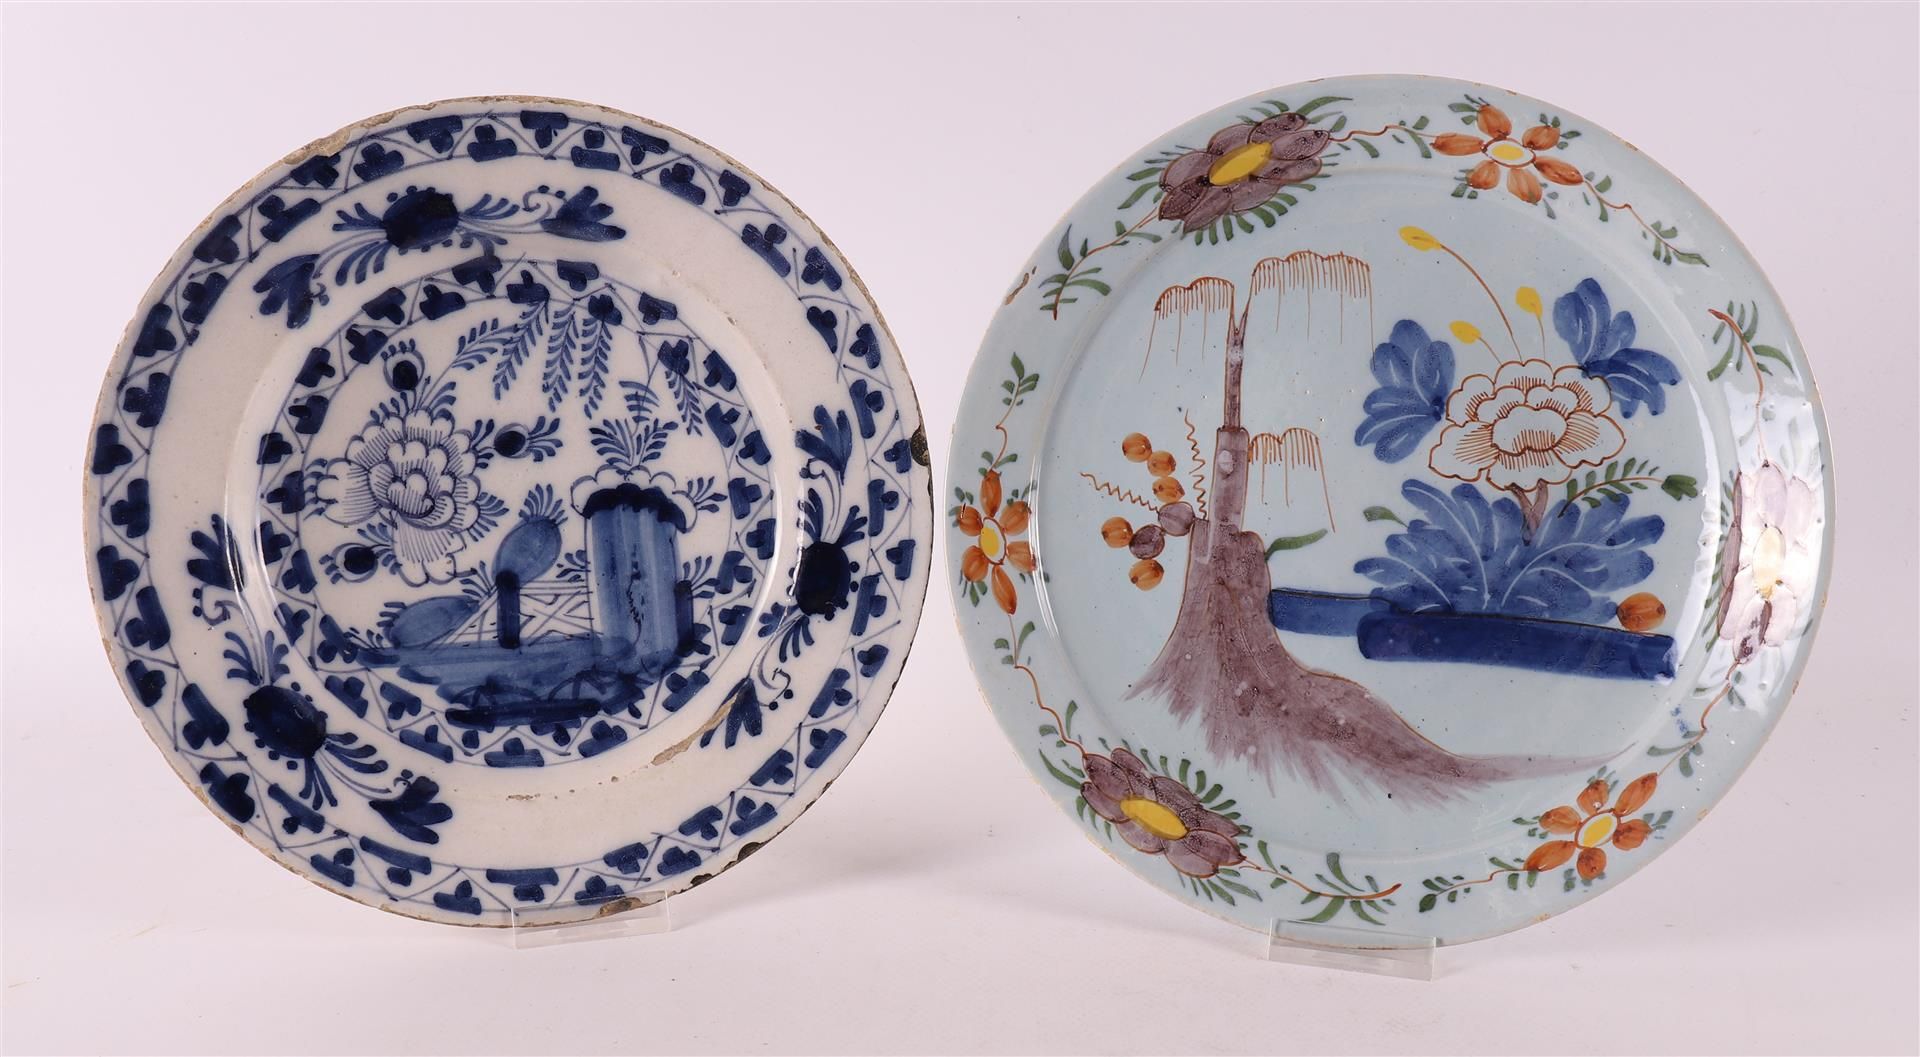 A polychrome Delftware plate with Chinoise decor, 18th century, Ø 22.5 cm. Hereby blue / white Delft